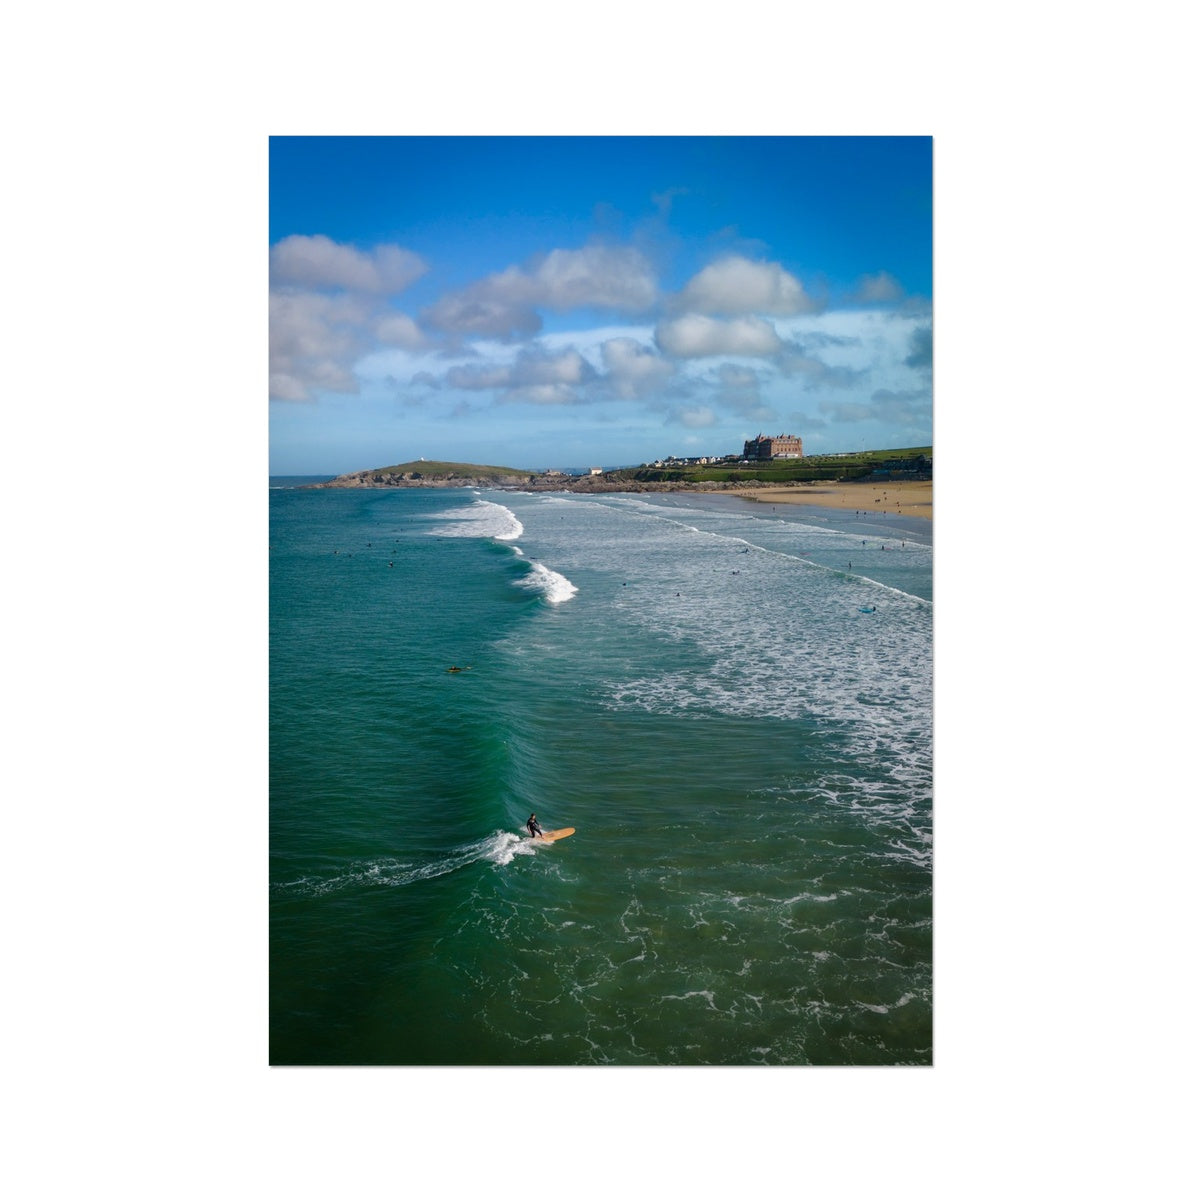 Fistral Surf ~ Photograph